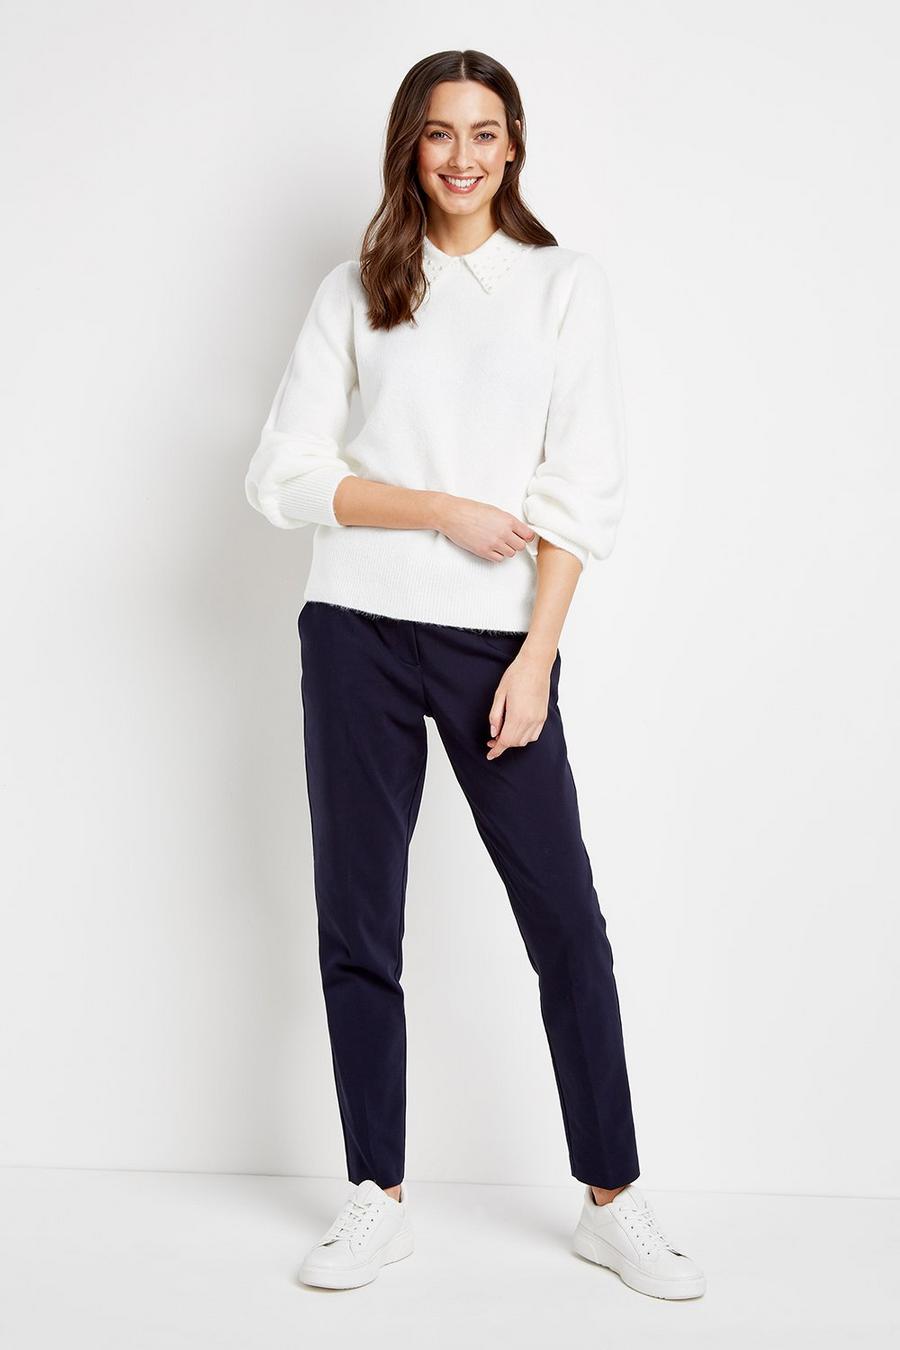 PETITE Navy Belted Cigarette Trousers